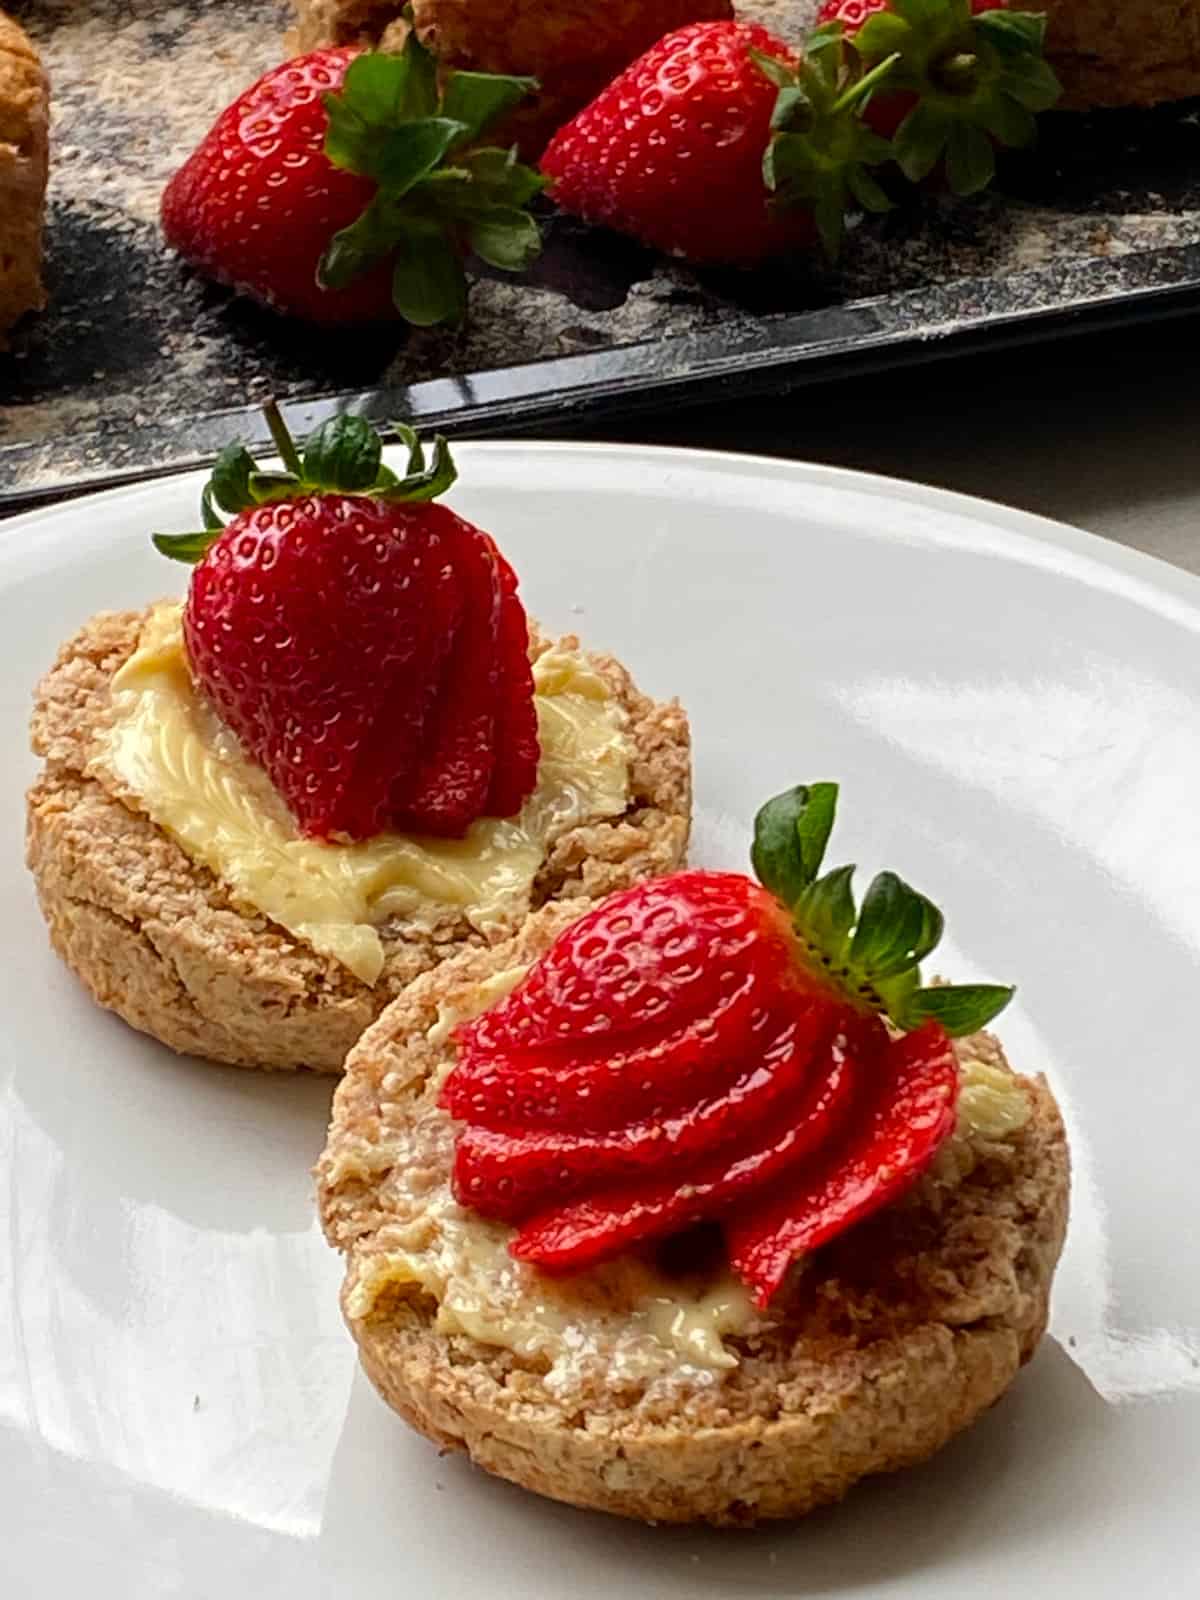 Sliced scone on a white plate, with butter and slices of strawberries on the top.